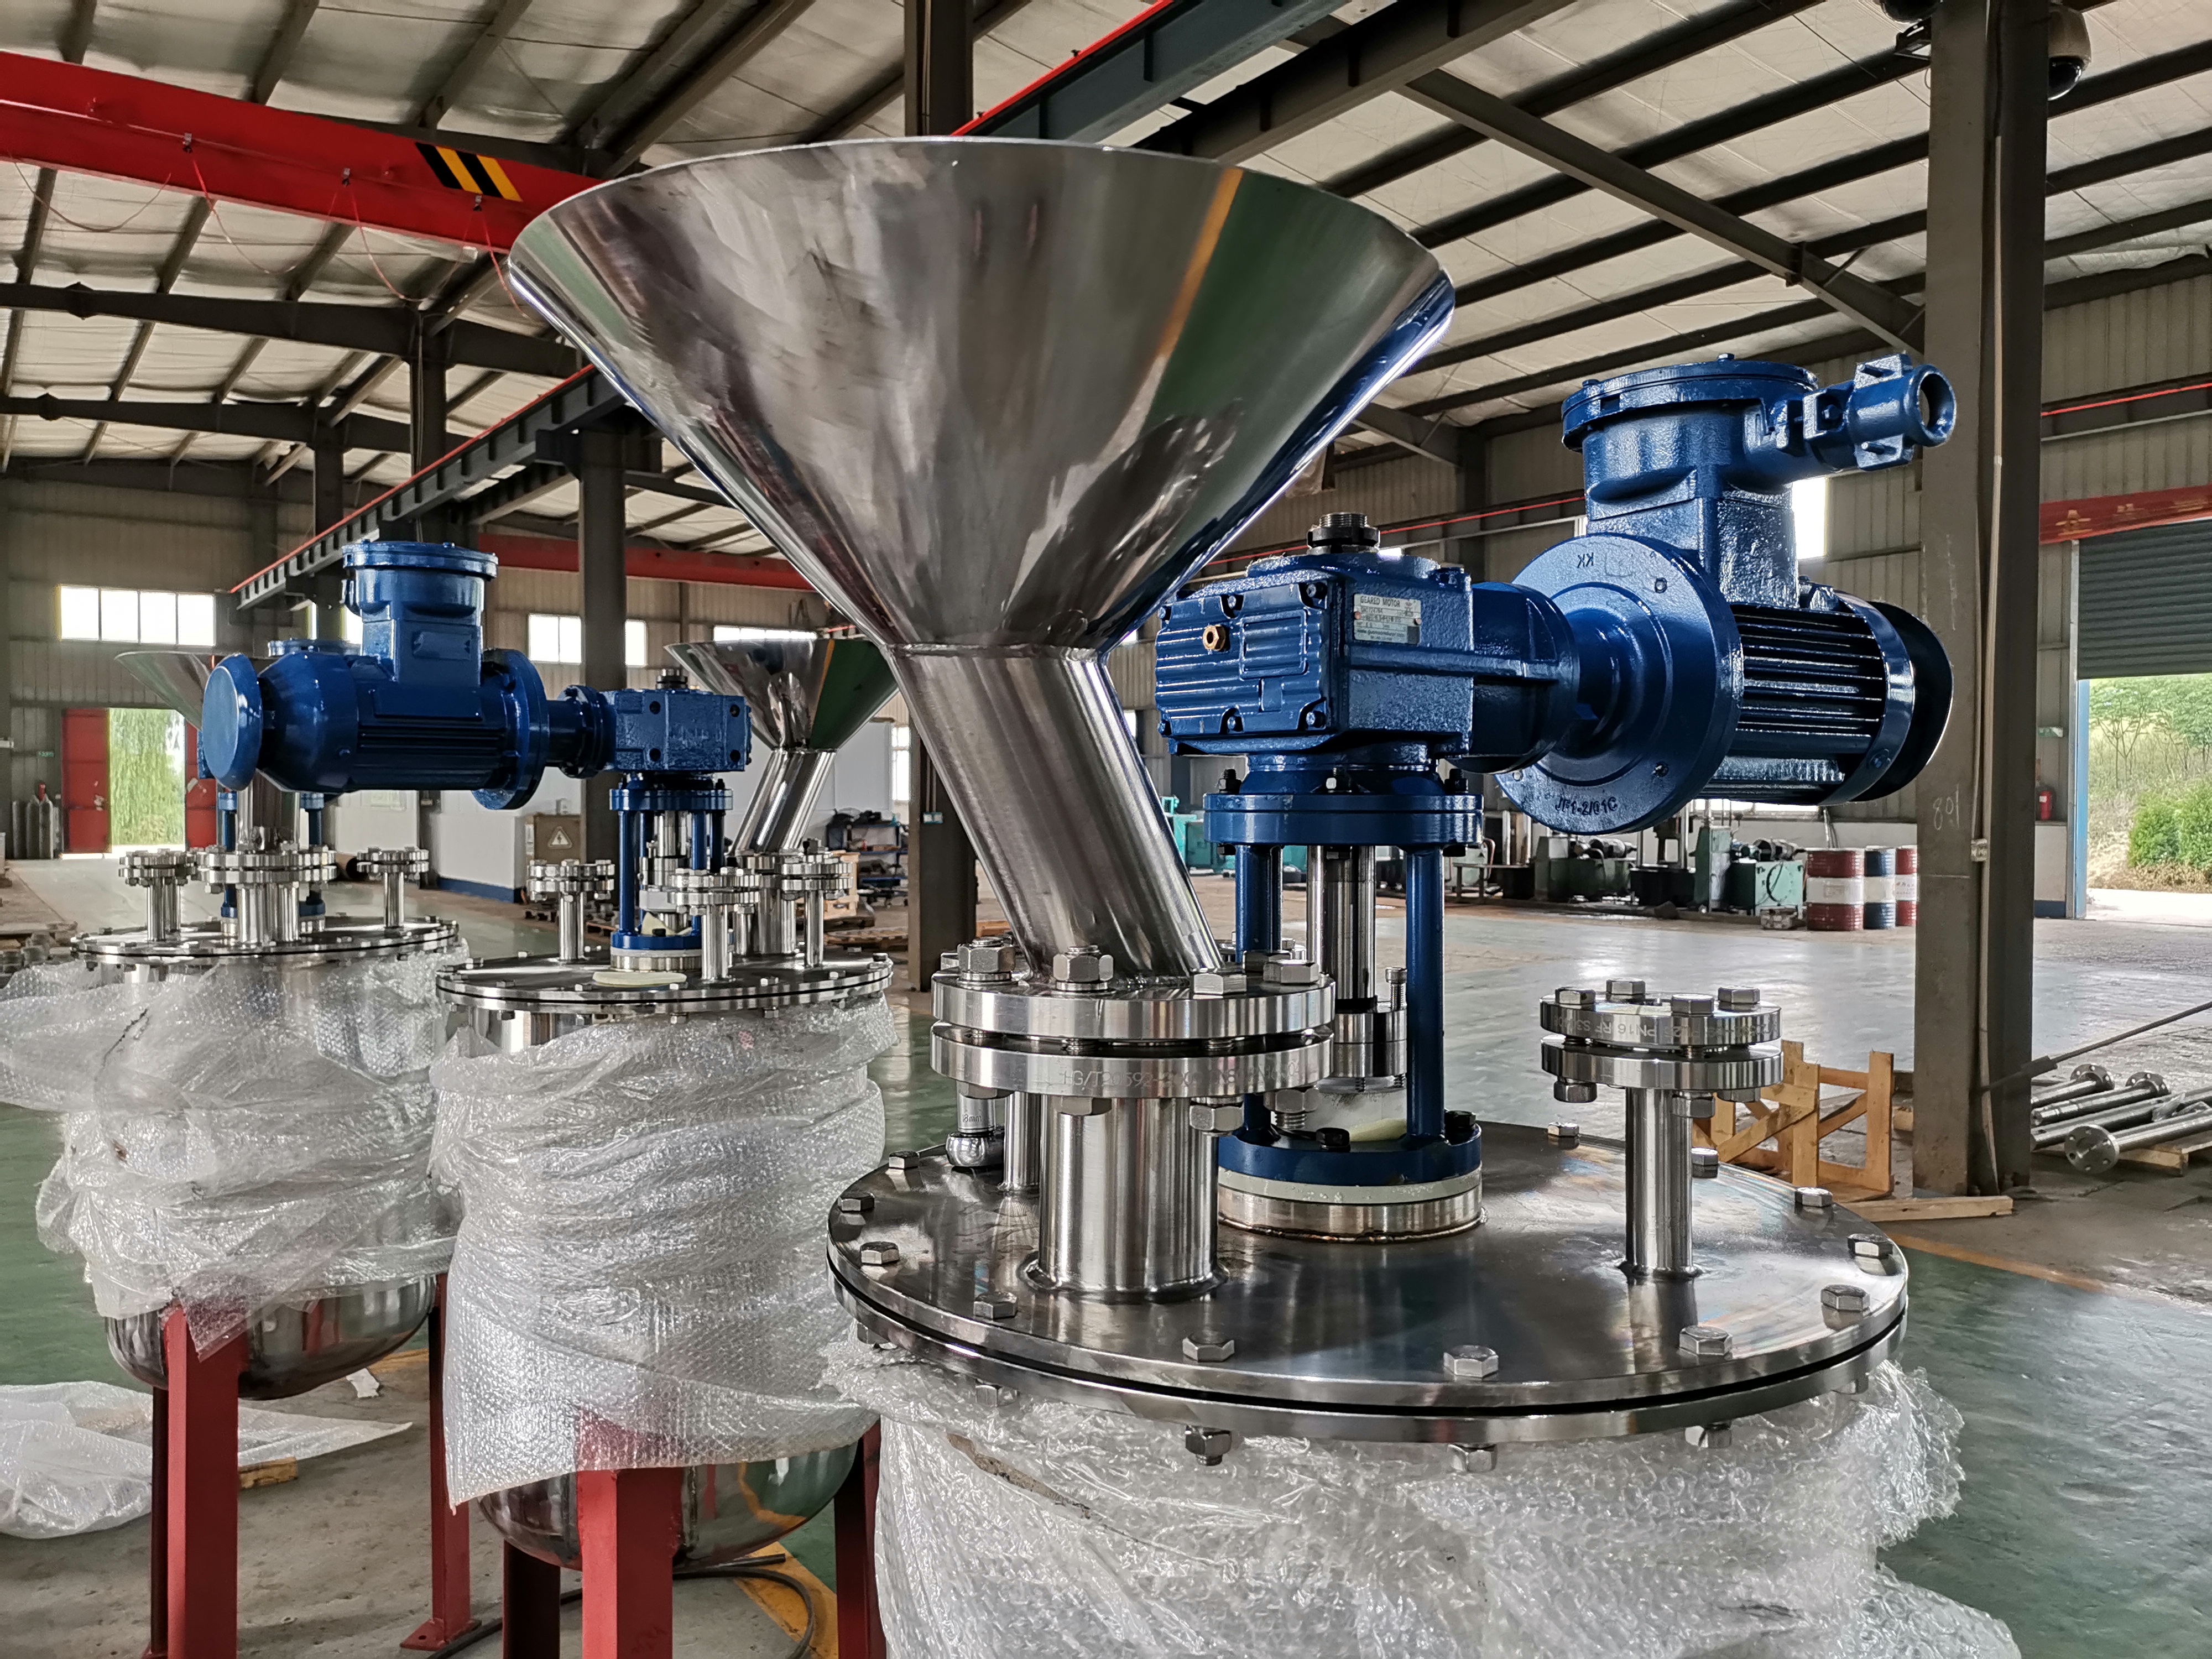 Stainless Steel Mixers And Agitators For Process Requirements Agitators And Applications For Food Chemical Biopharma Industries.